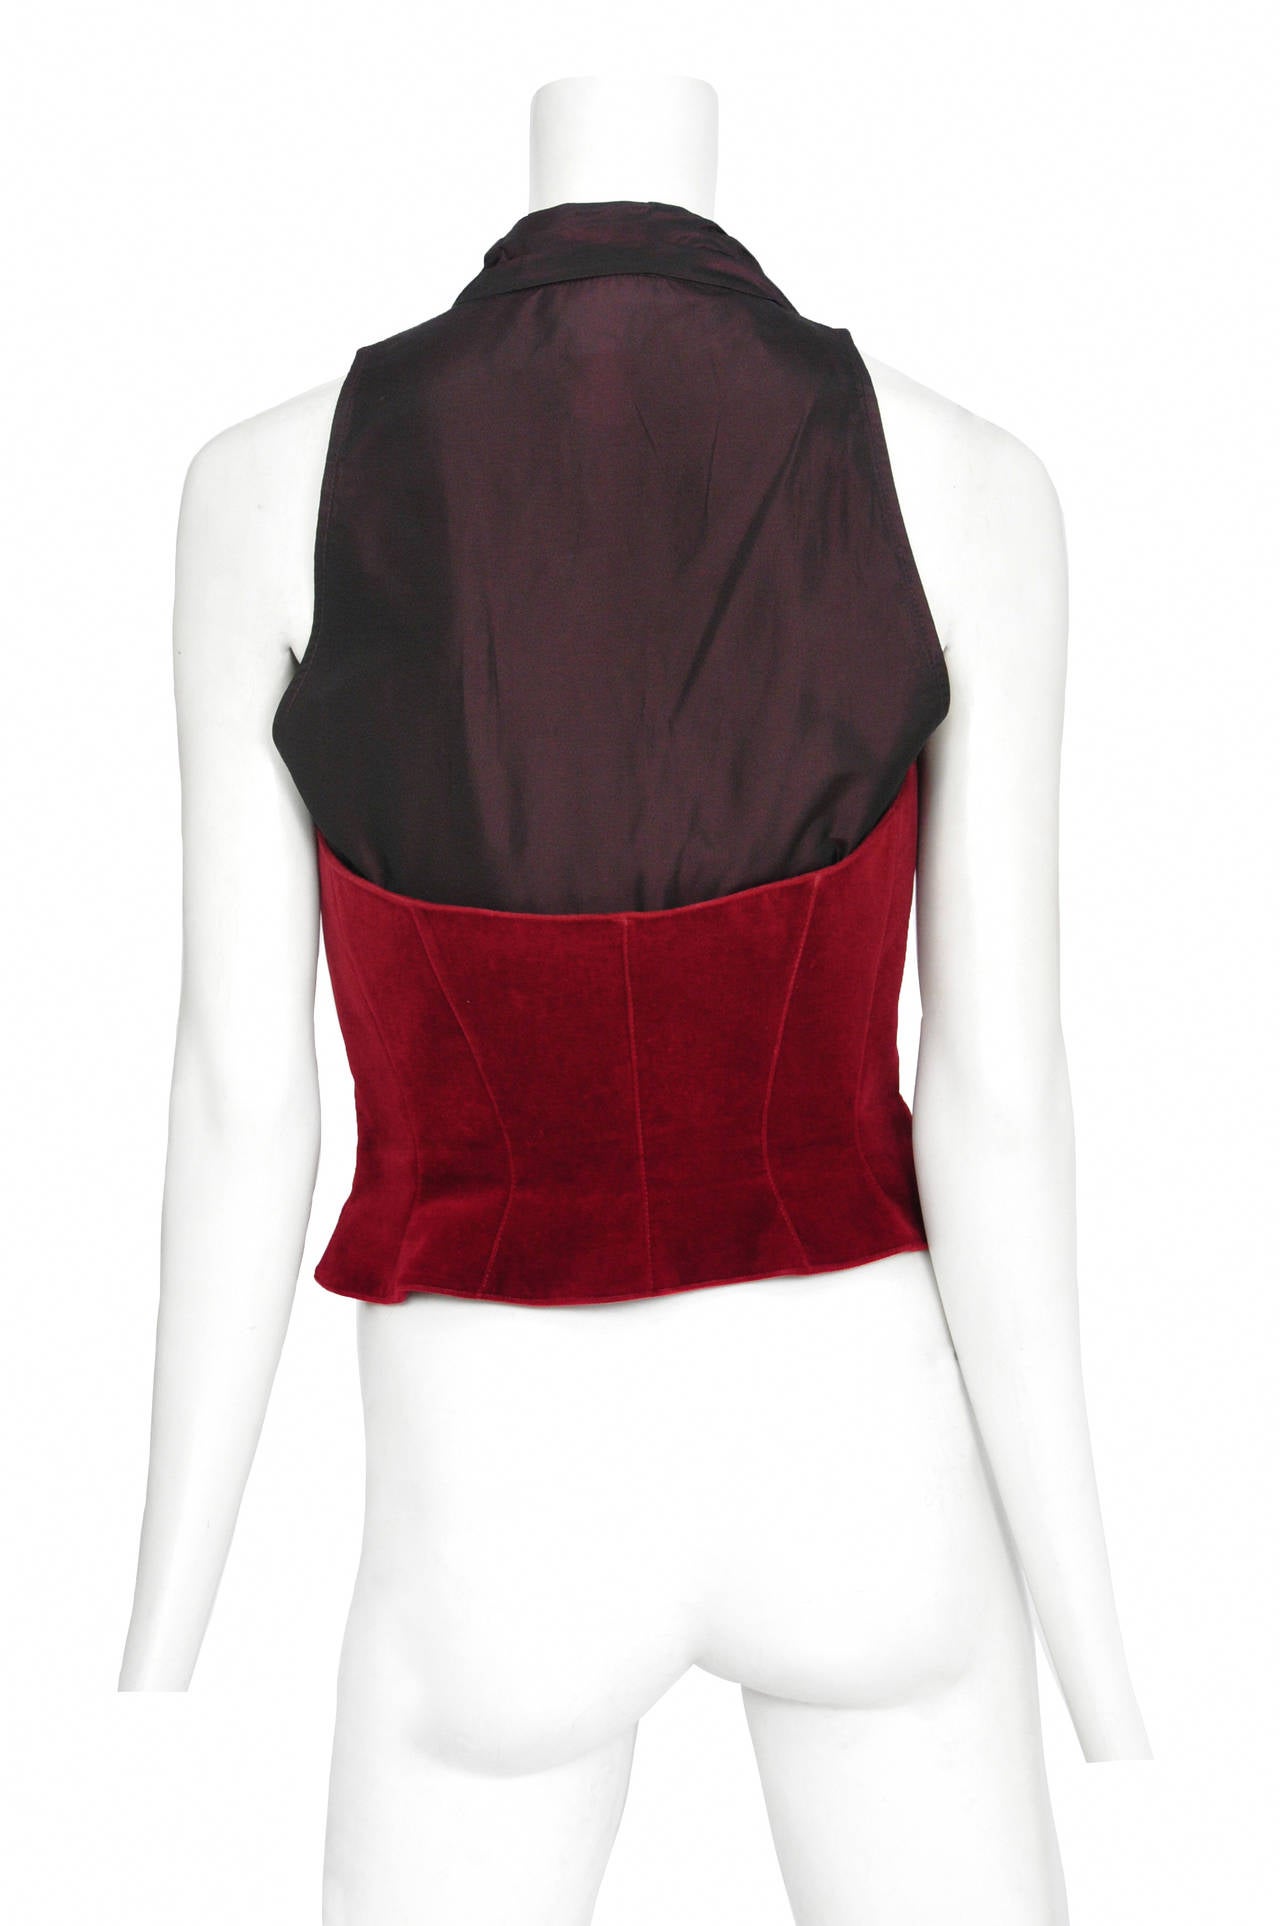 Vintage Thierry Mugler red velvet & taffeta corset top featuring purple taffeta pleated from hem to halter style collar and a red velvet corseted waist.